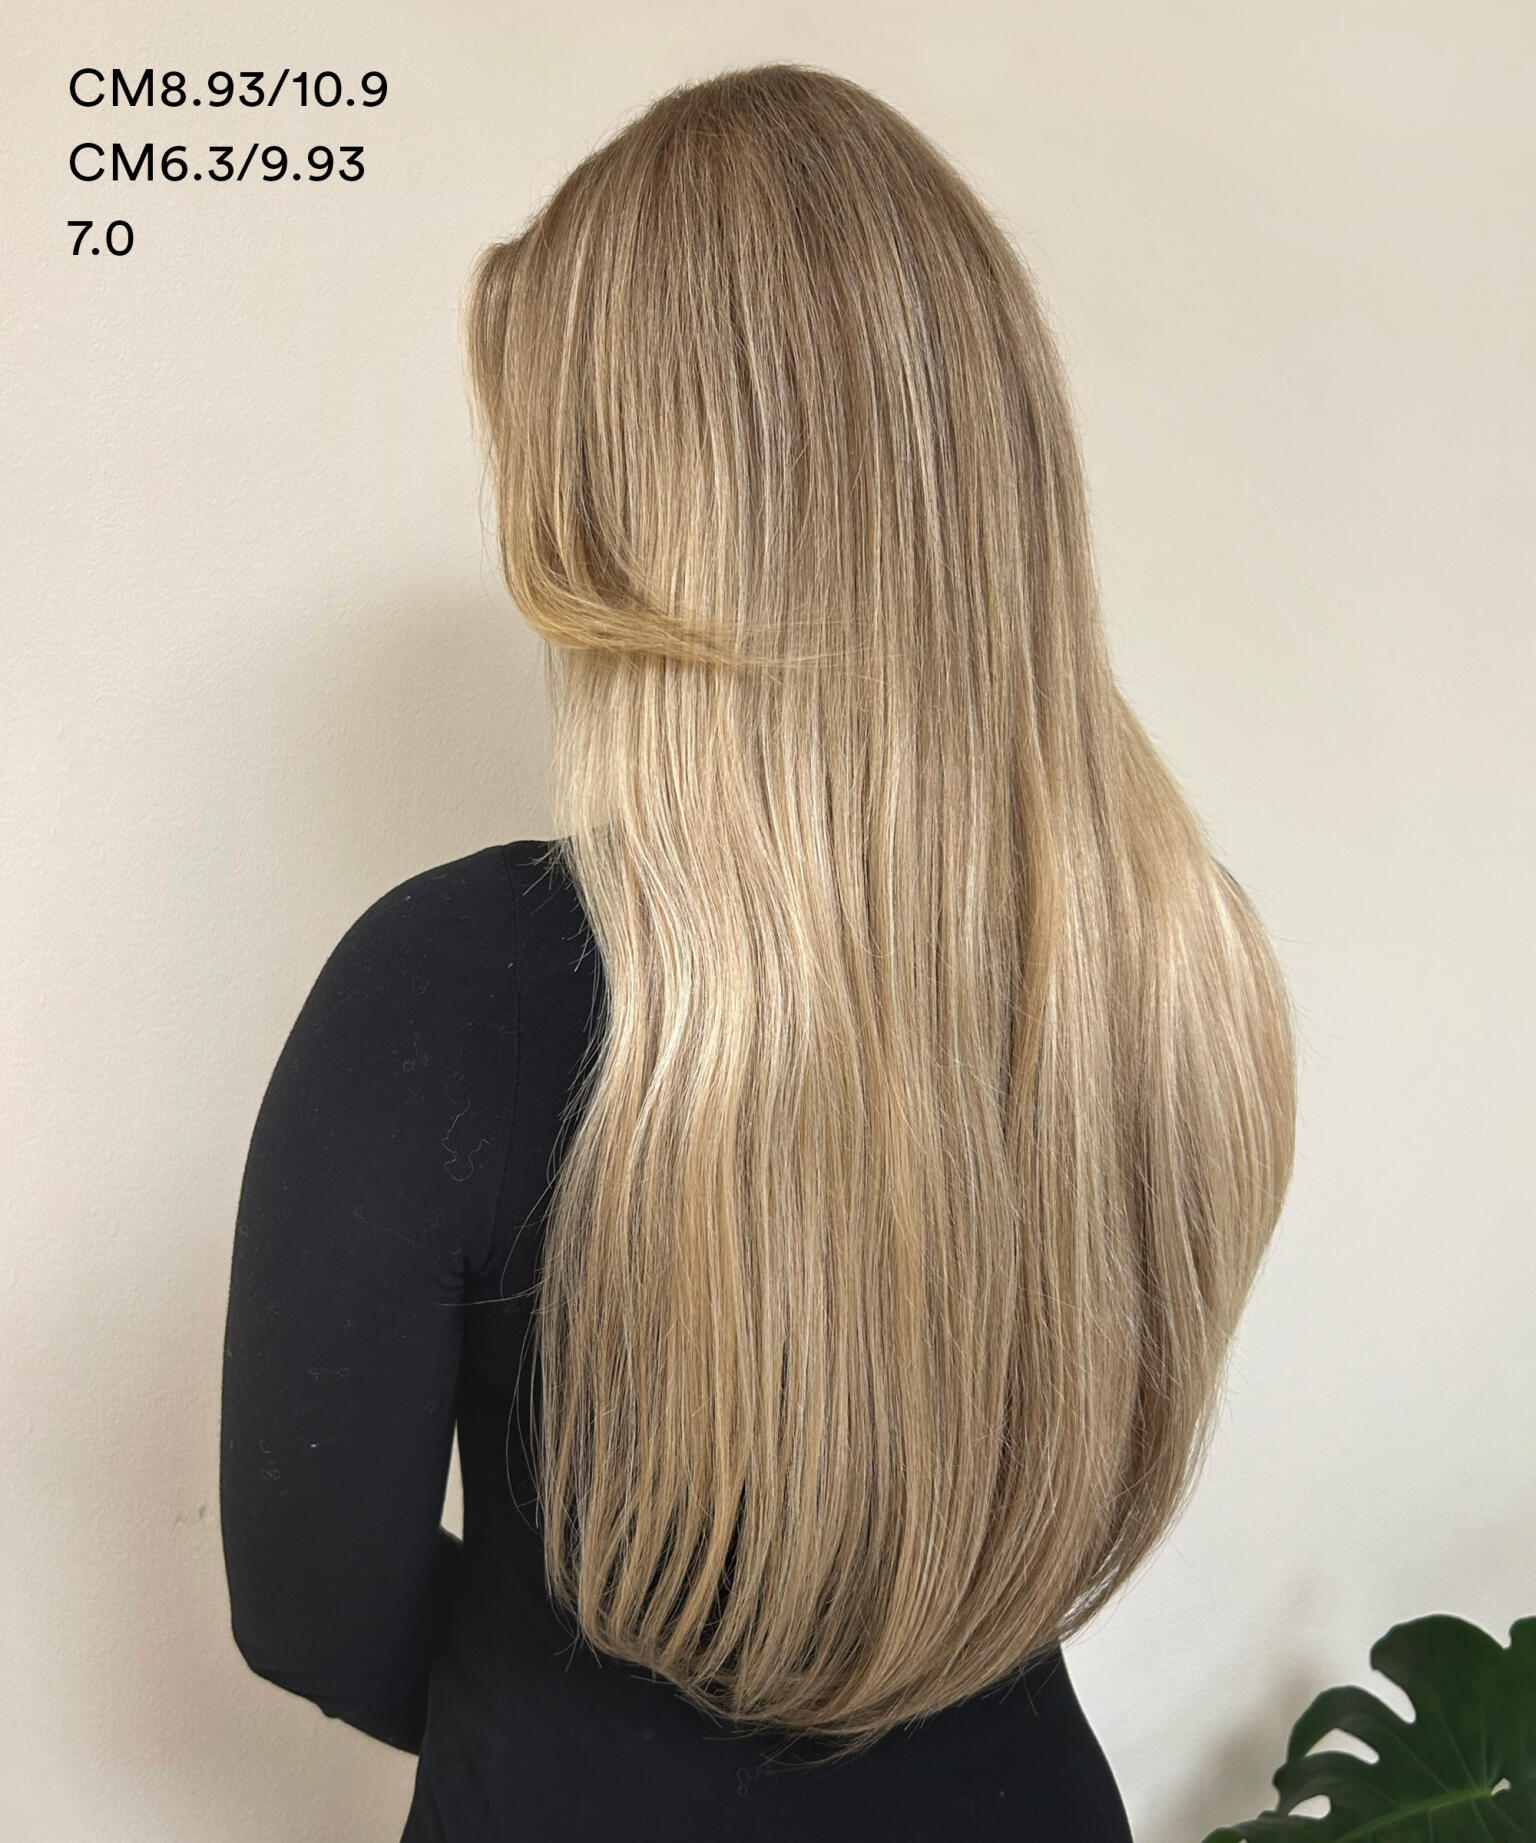 Luxe Tape Extensions Seamless 3 CM8.93/10.9 50 cm